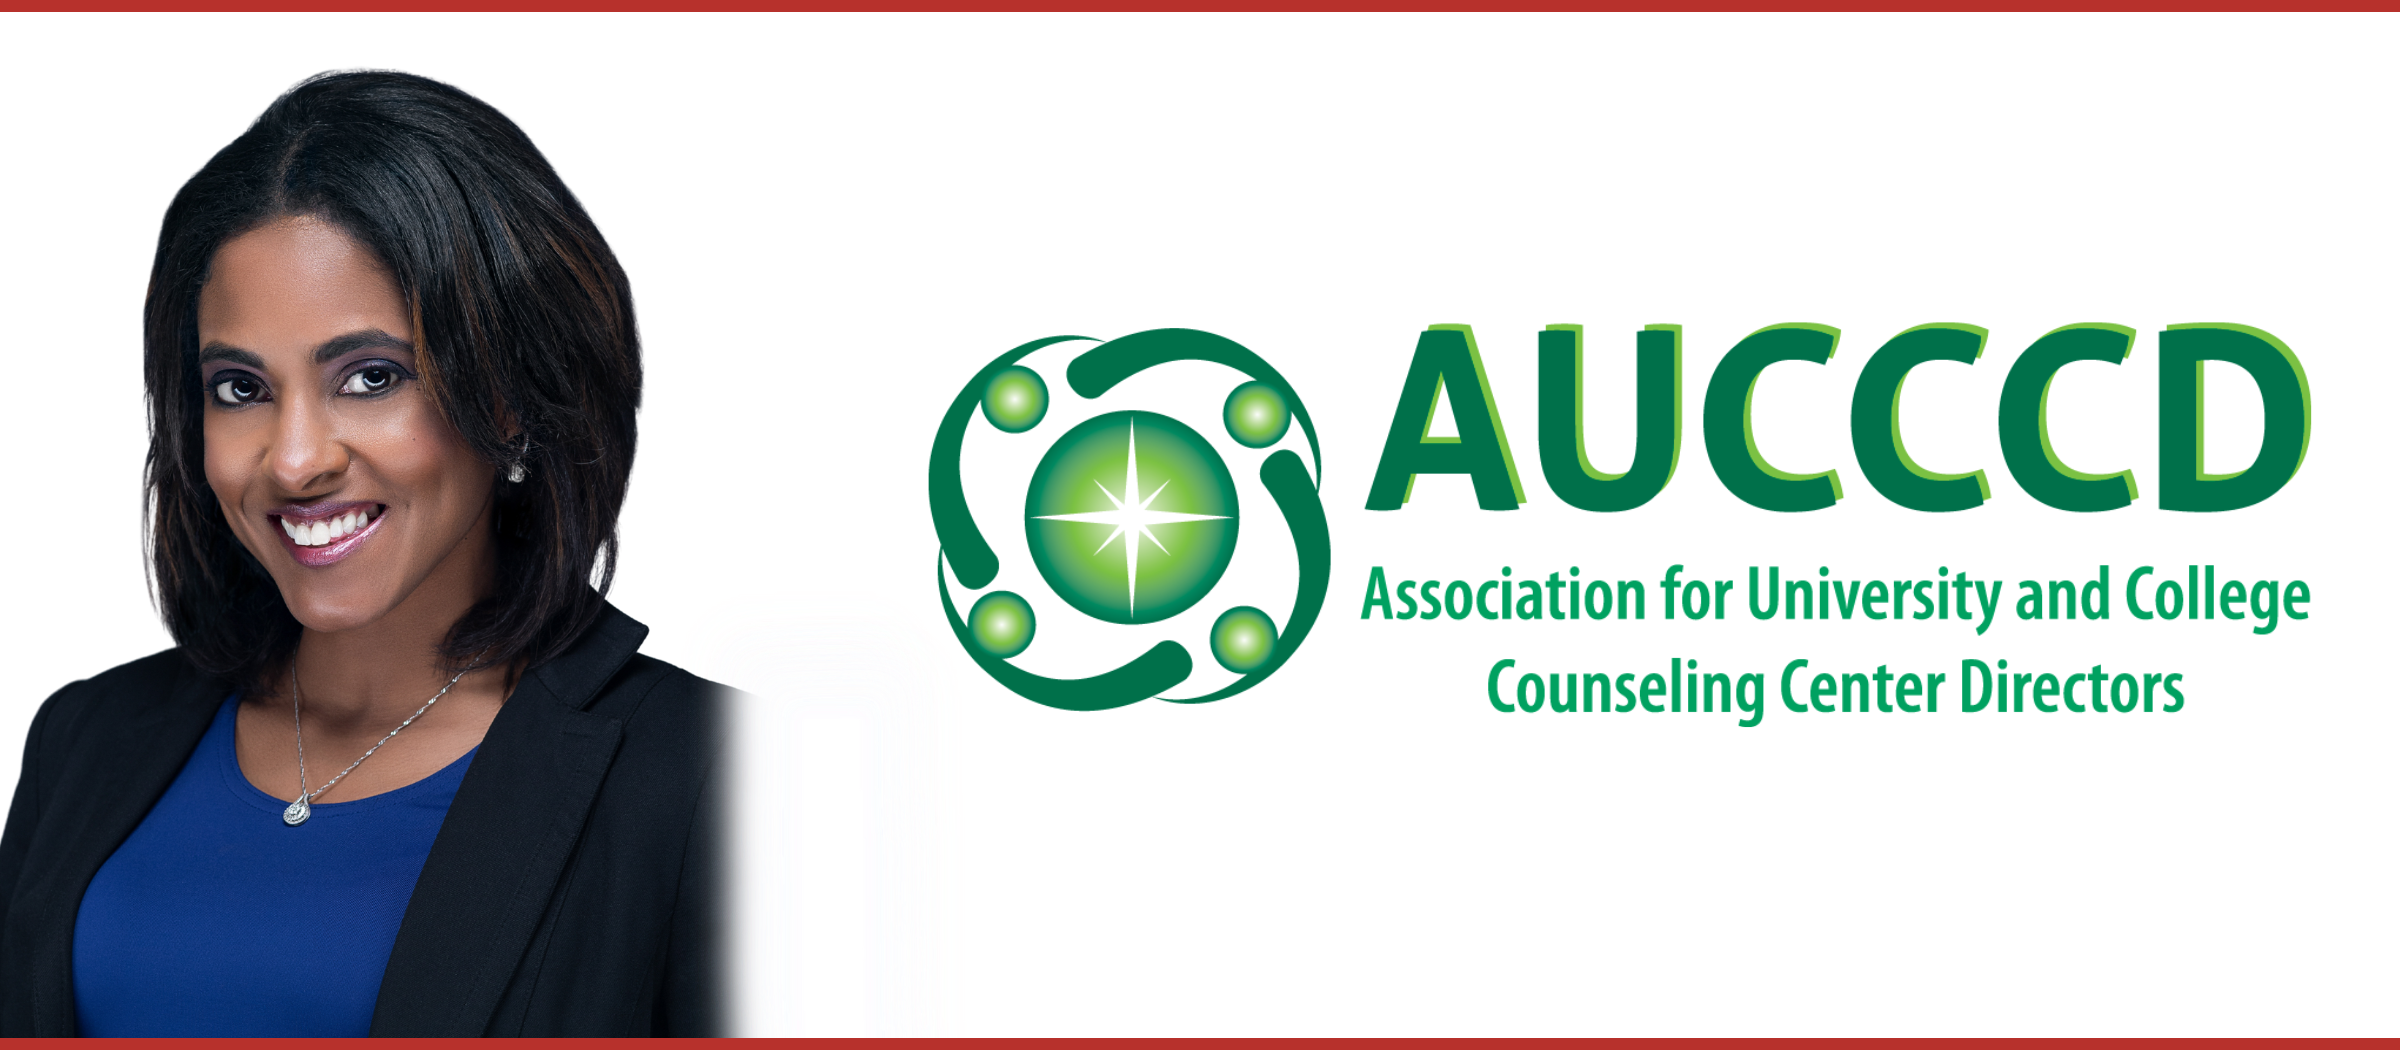 UDC Counseling and Wellness Center Director elected to AUCCCD